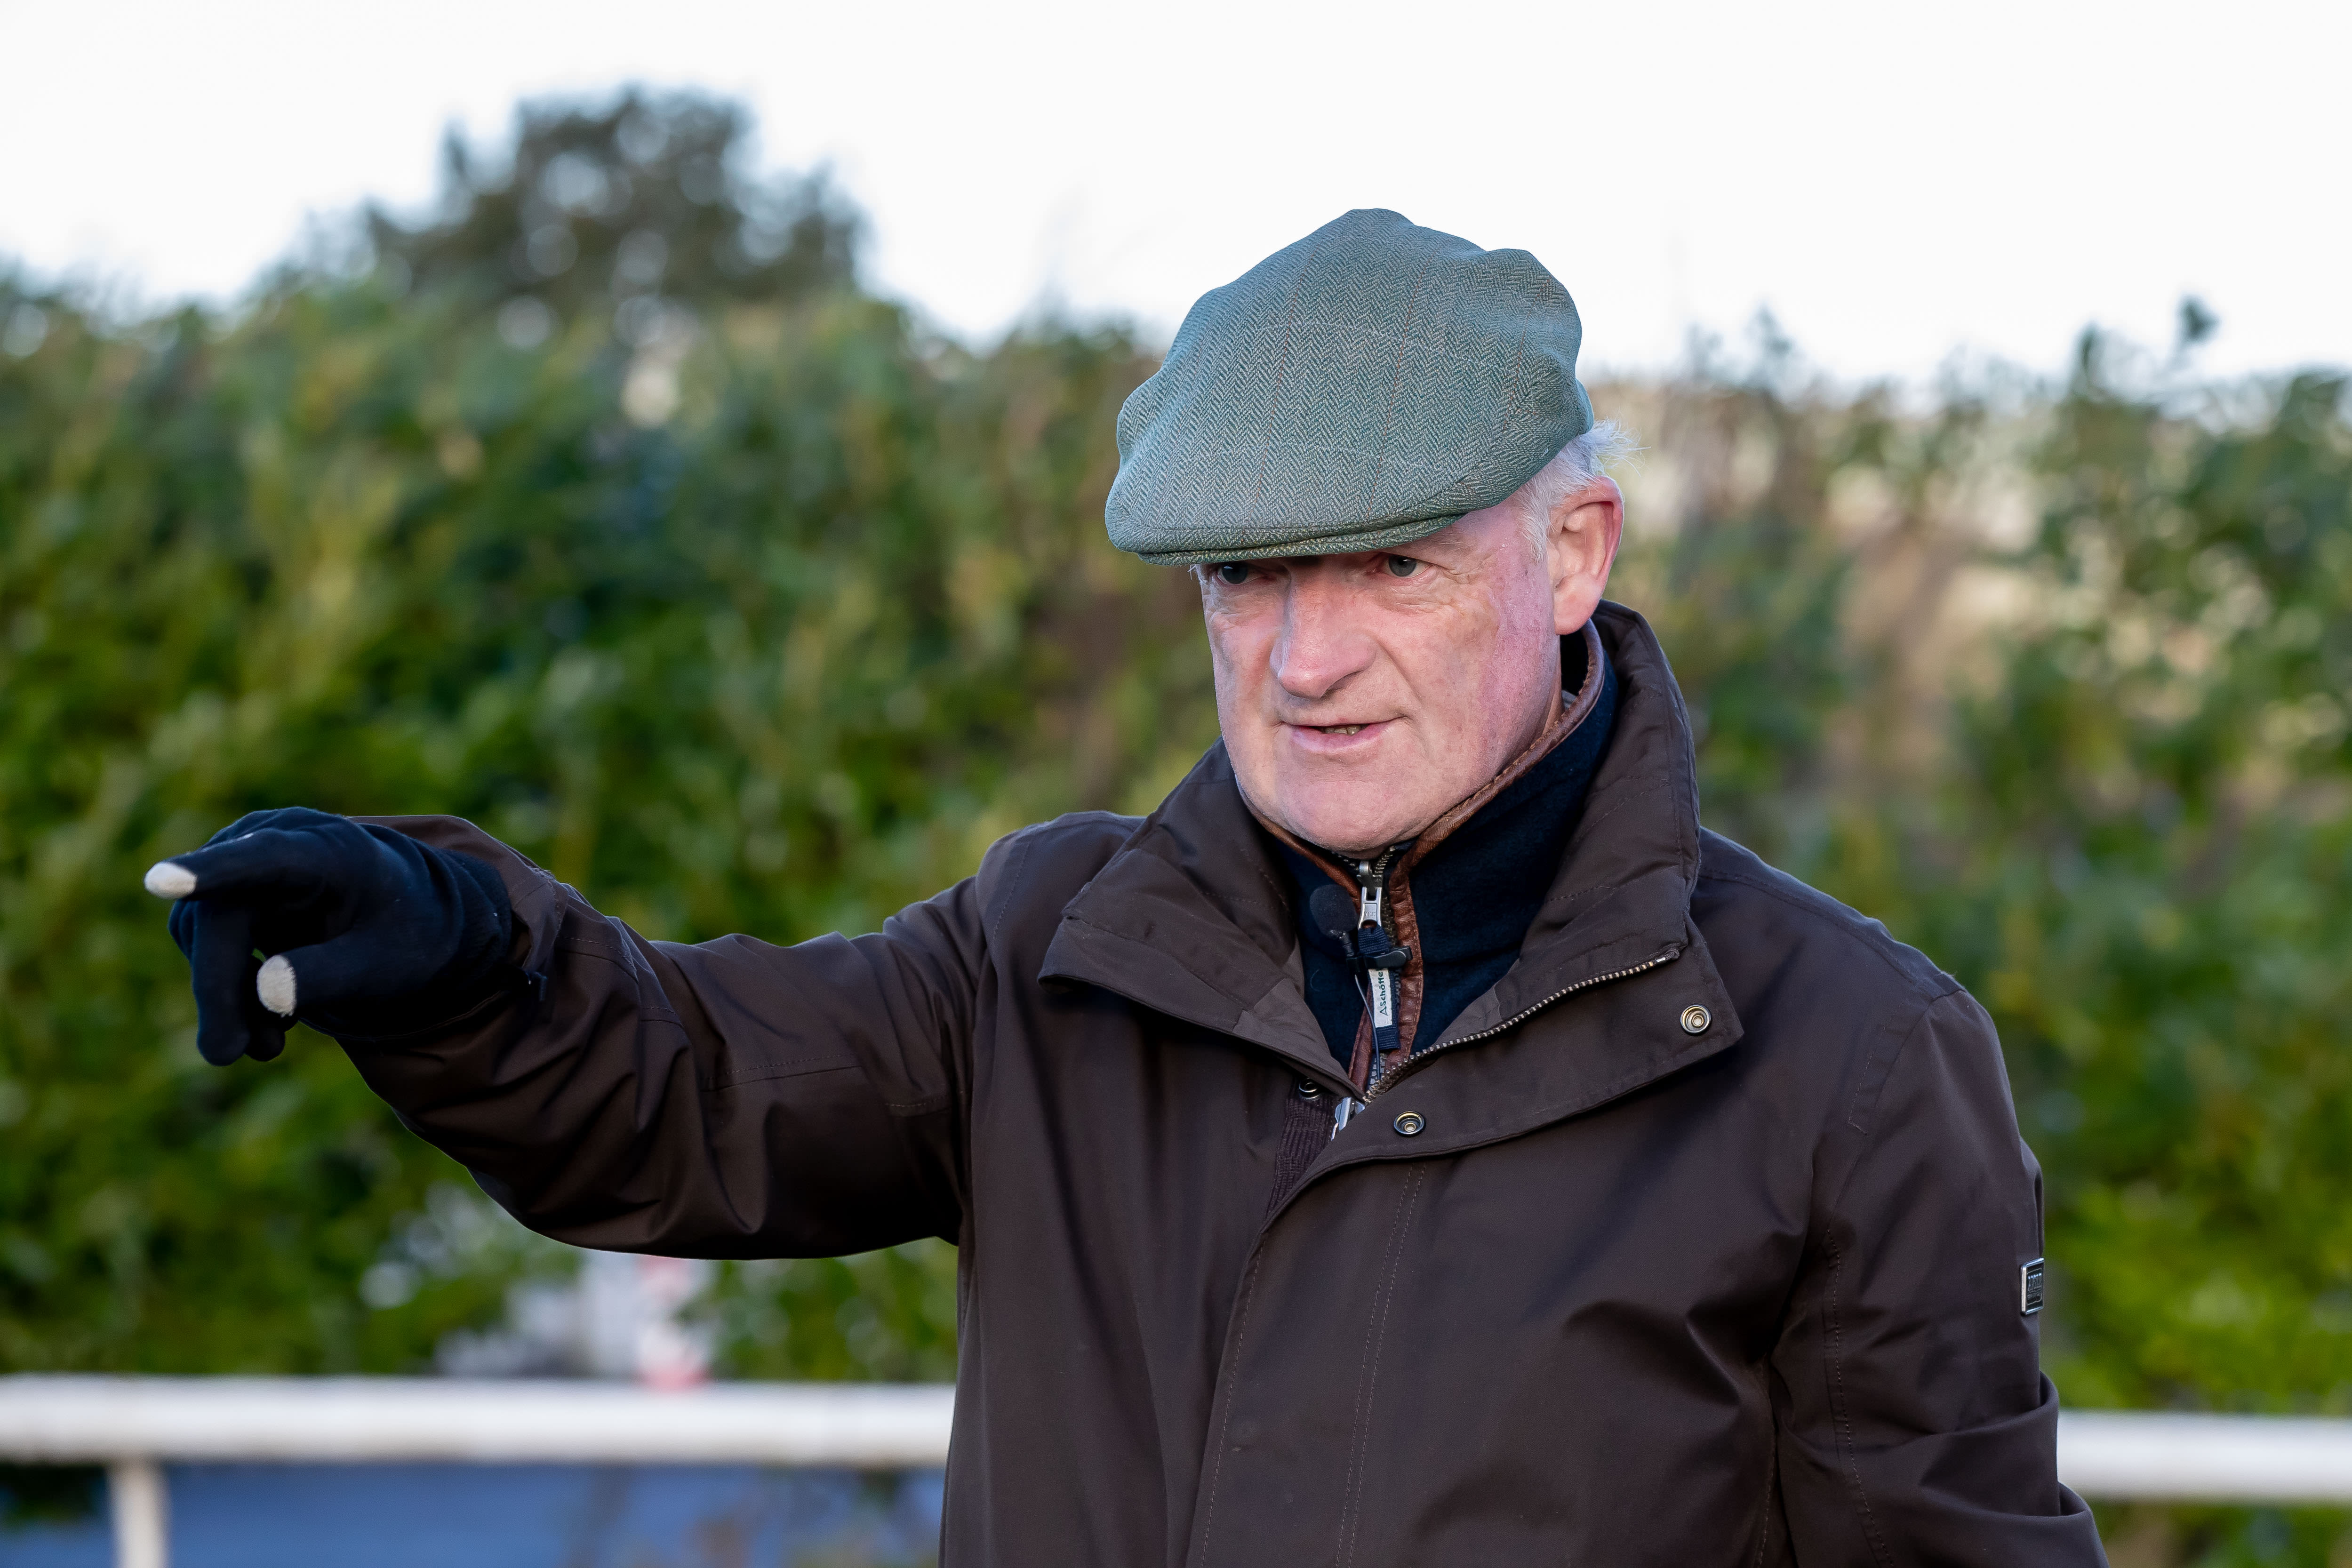  Willie Mullins gives the latest on some of his stars ahead of the BARONERACING.COM Winter Festival at Fairyhouse (Photo: INPHO photography)